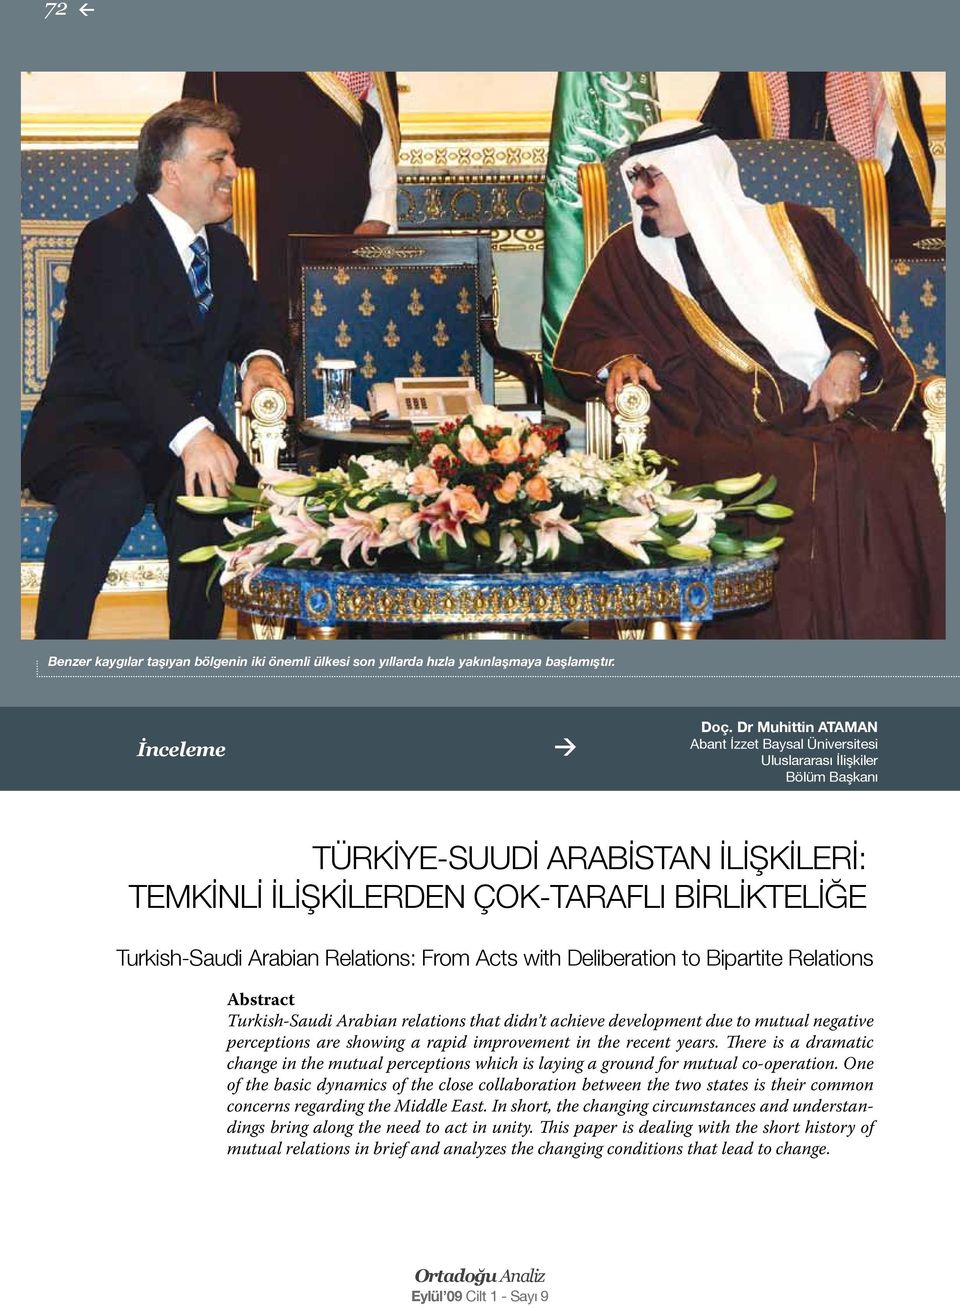 Relations: From Acts with Deliberation to Bipartite Relations Abstract Turkish-Saudi Arabian relations that didn t achieve development due to mutual negative perceptions are showing a rapid